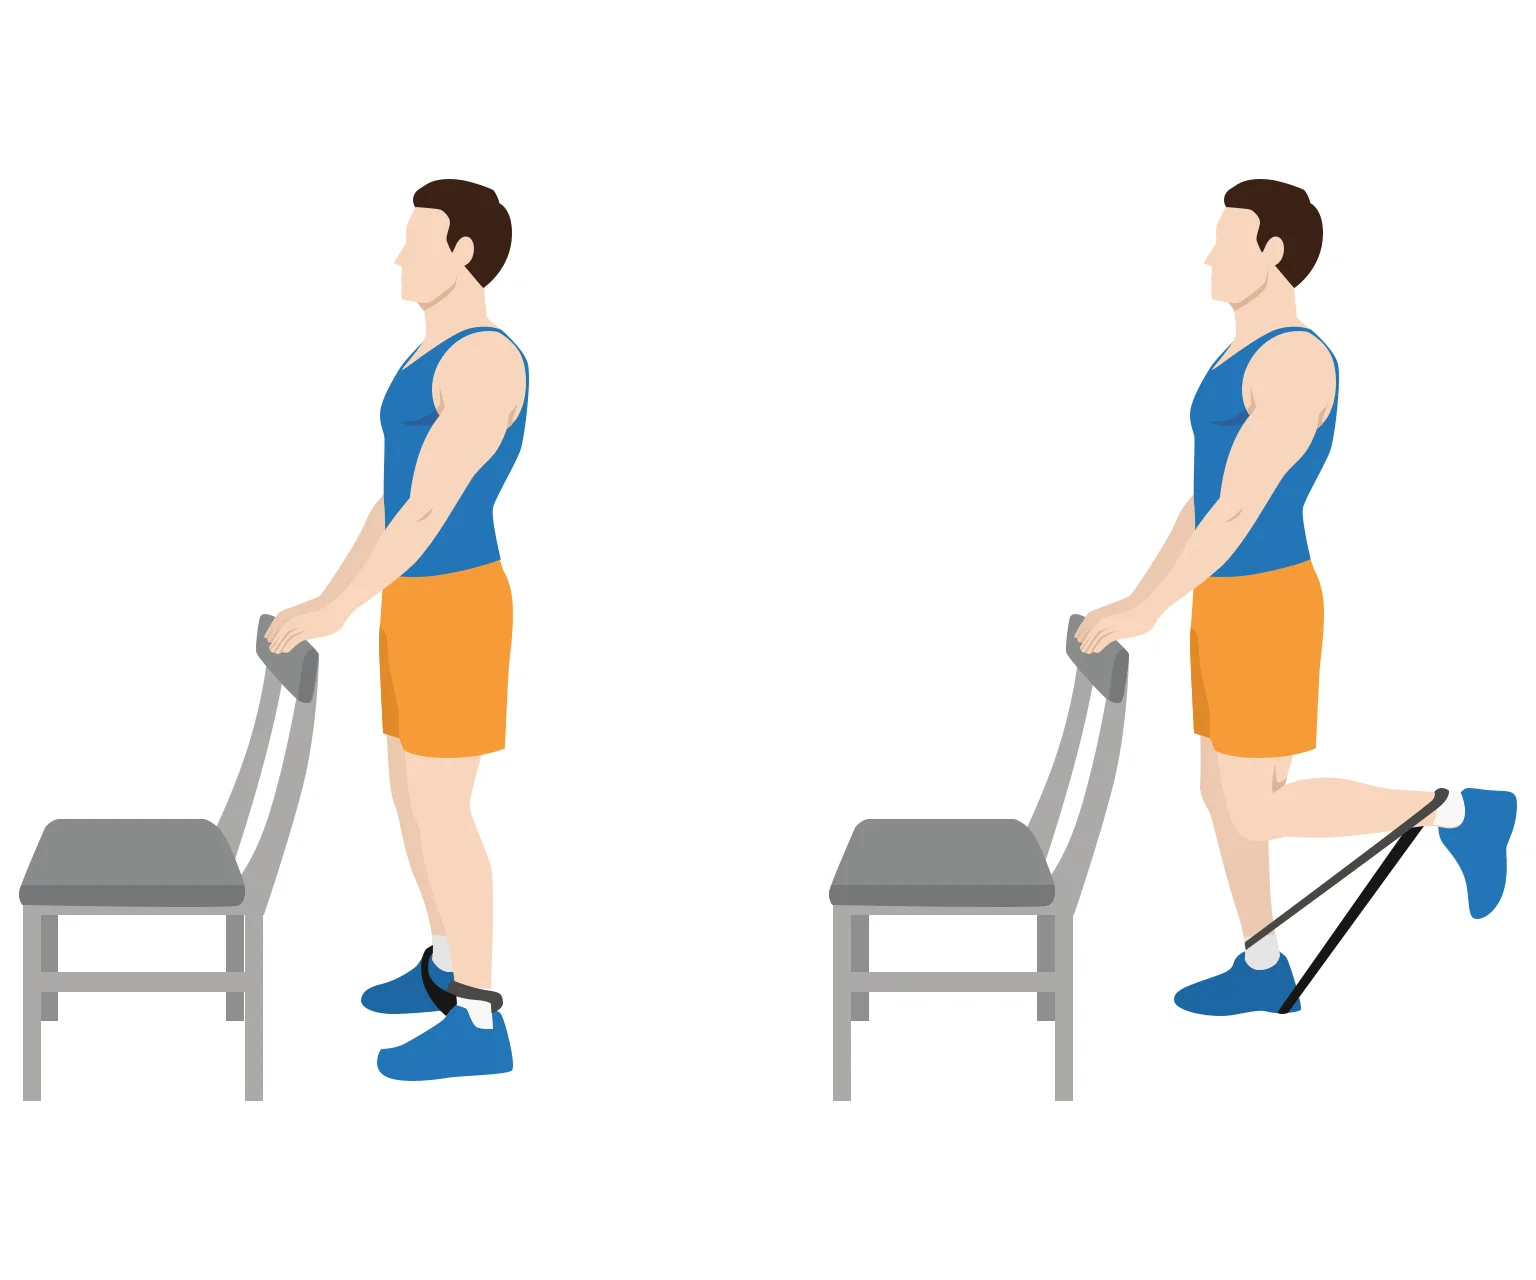 Illustration - How to do a resistance band standing leg curl